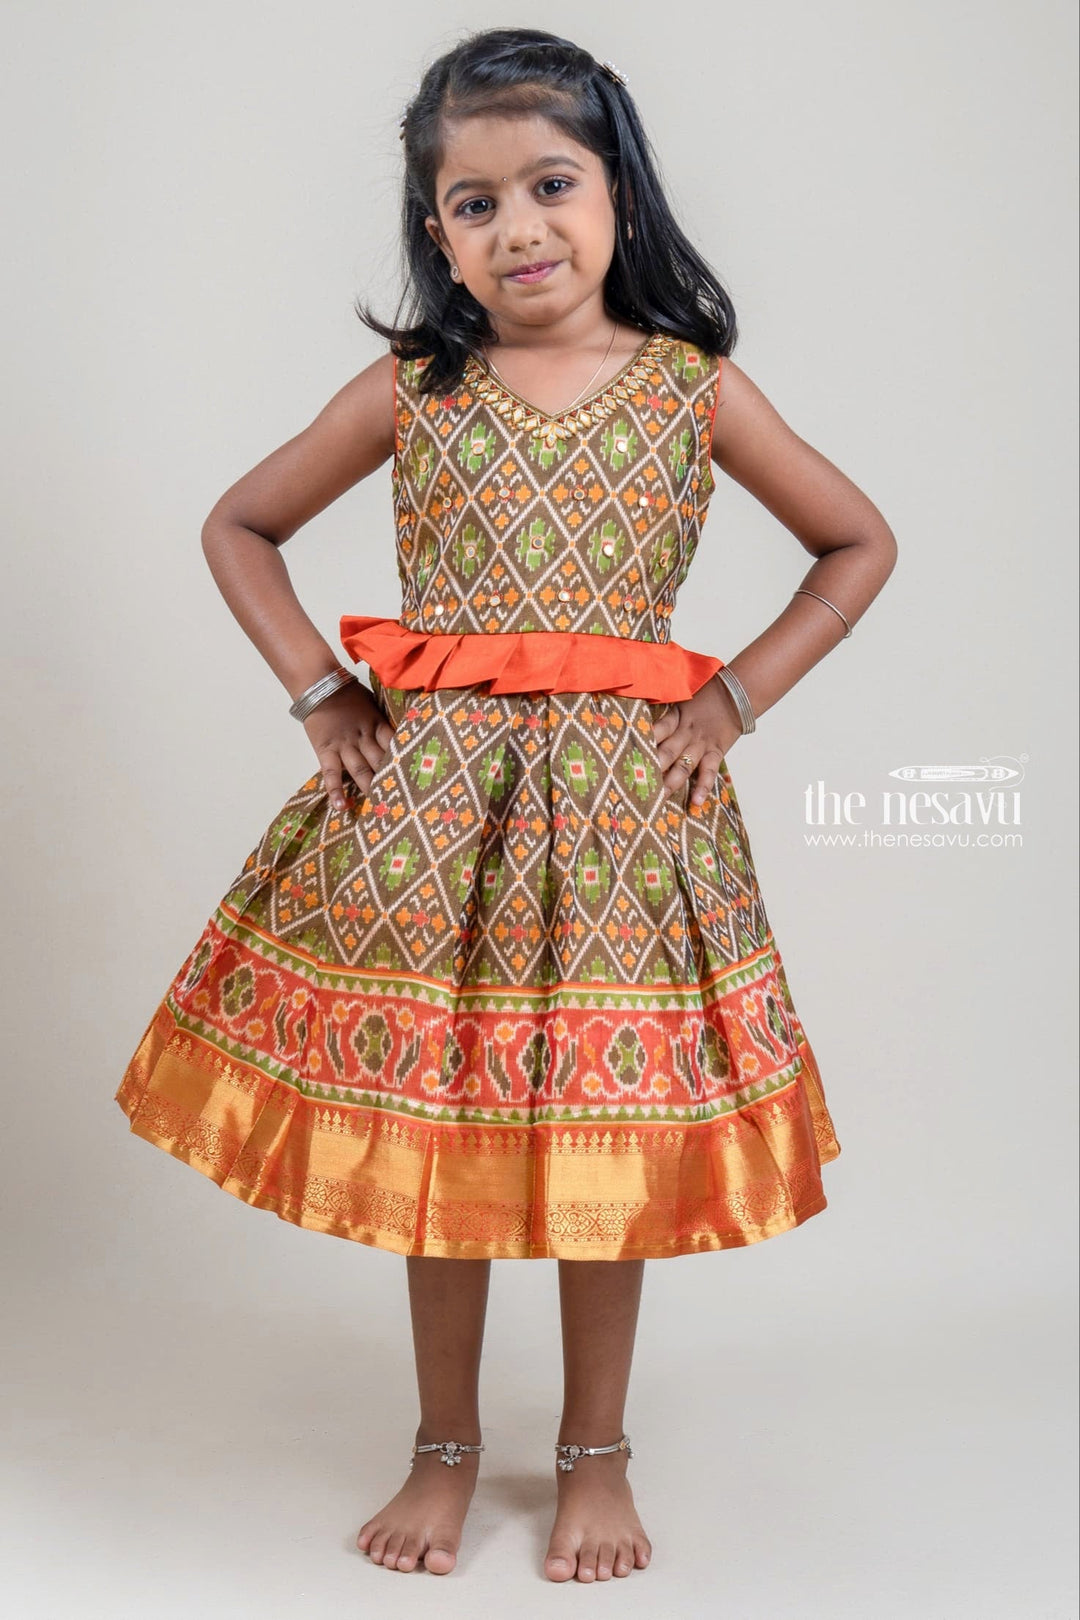 The Nesavu Silk Party Frock Dazzling Multi-colored Geometrical Printed N Embellished Miror Work Silk Frock For Girls Nesavu 14 (6M) / multicolor / Printed Silk SF570-14 Designer Silk Gown For Girls | Latest Silk Frock Collection | The Nesavu